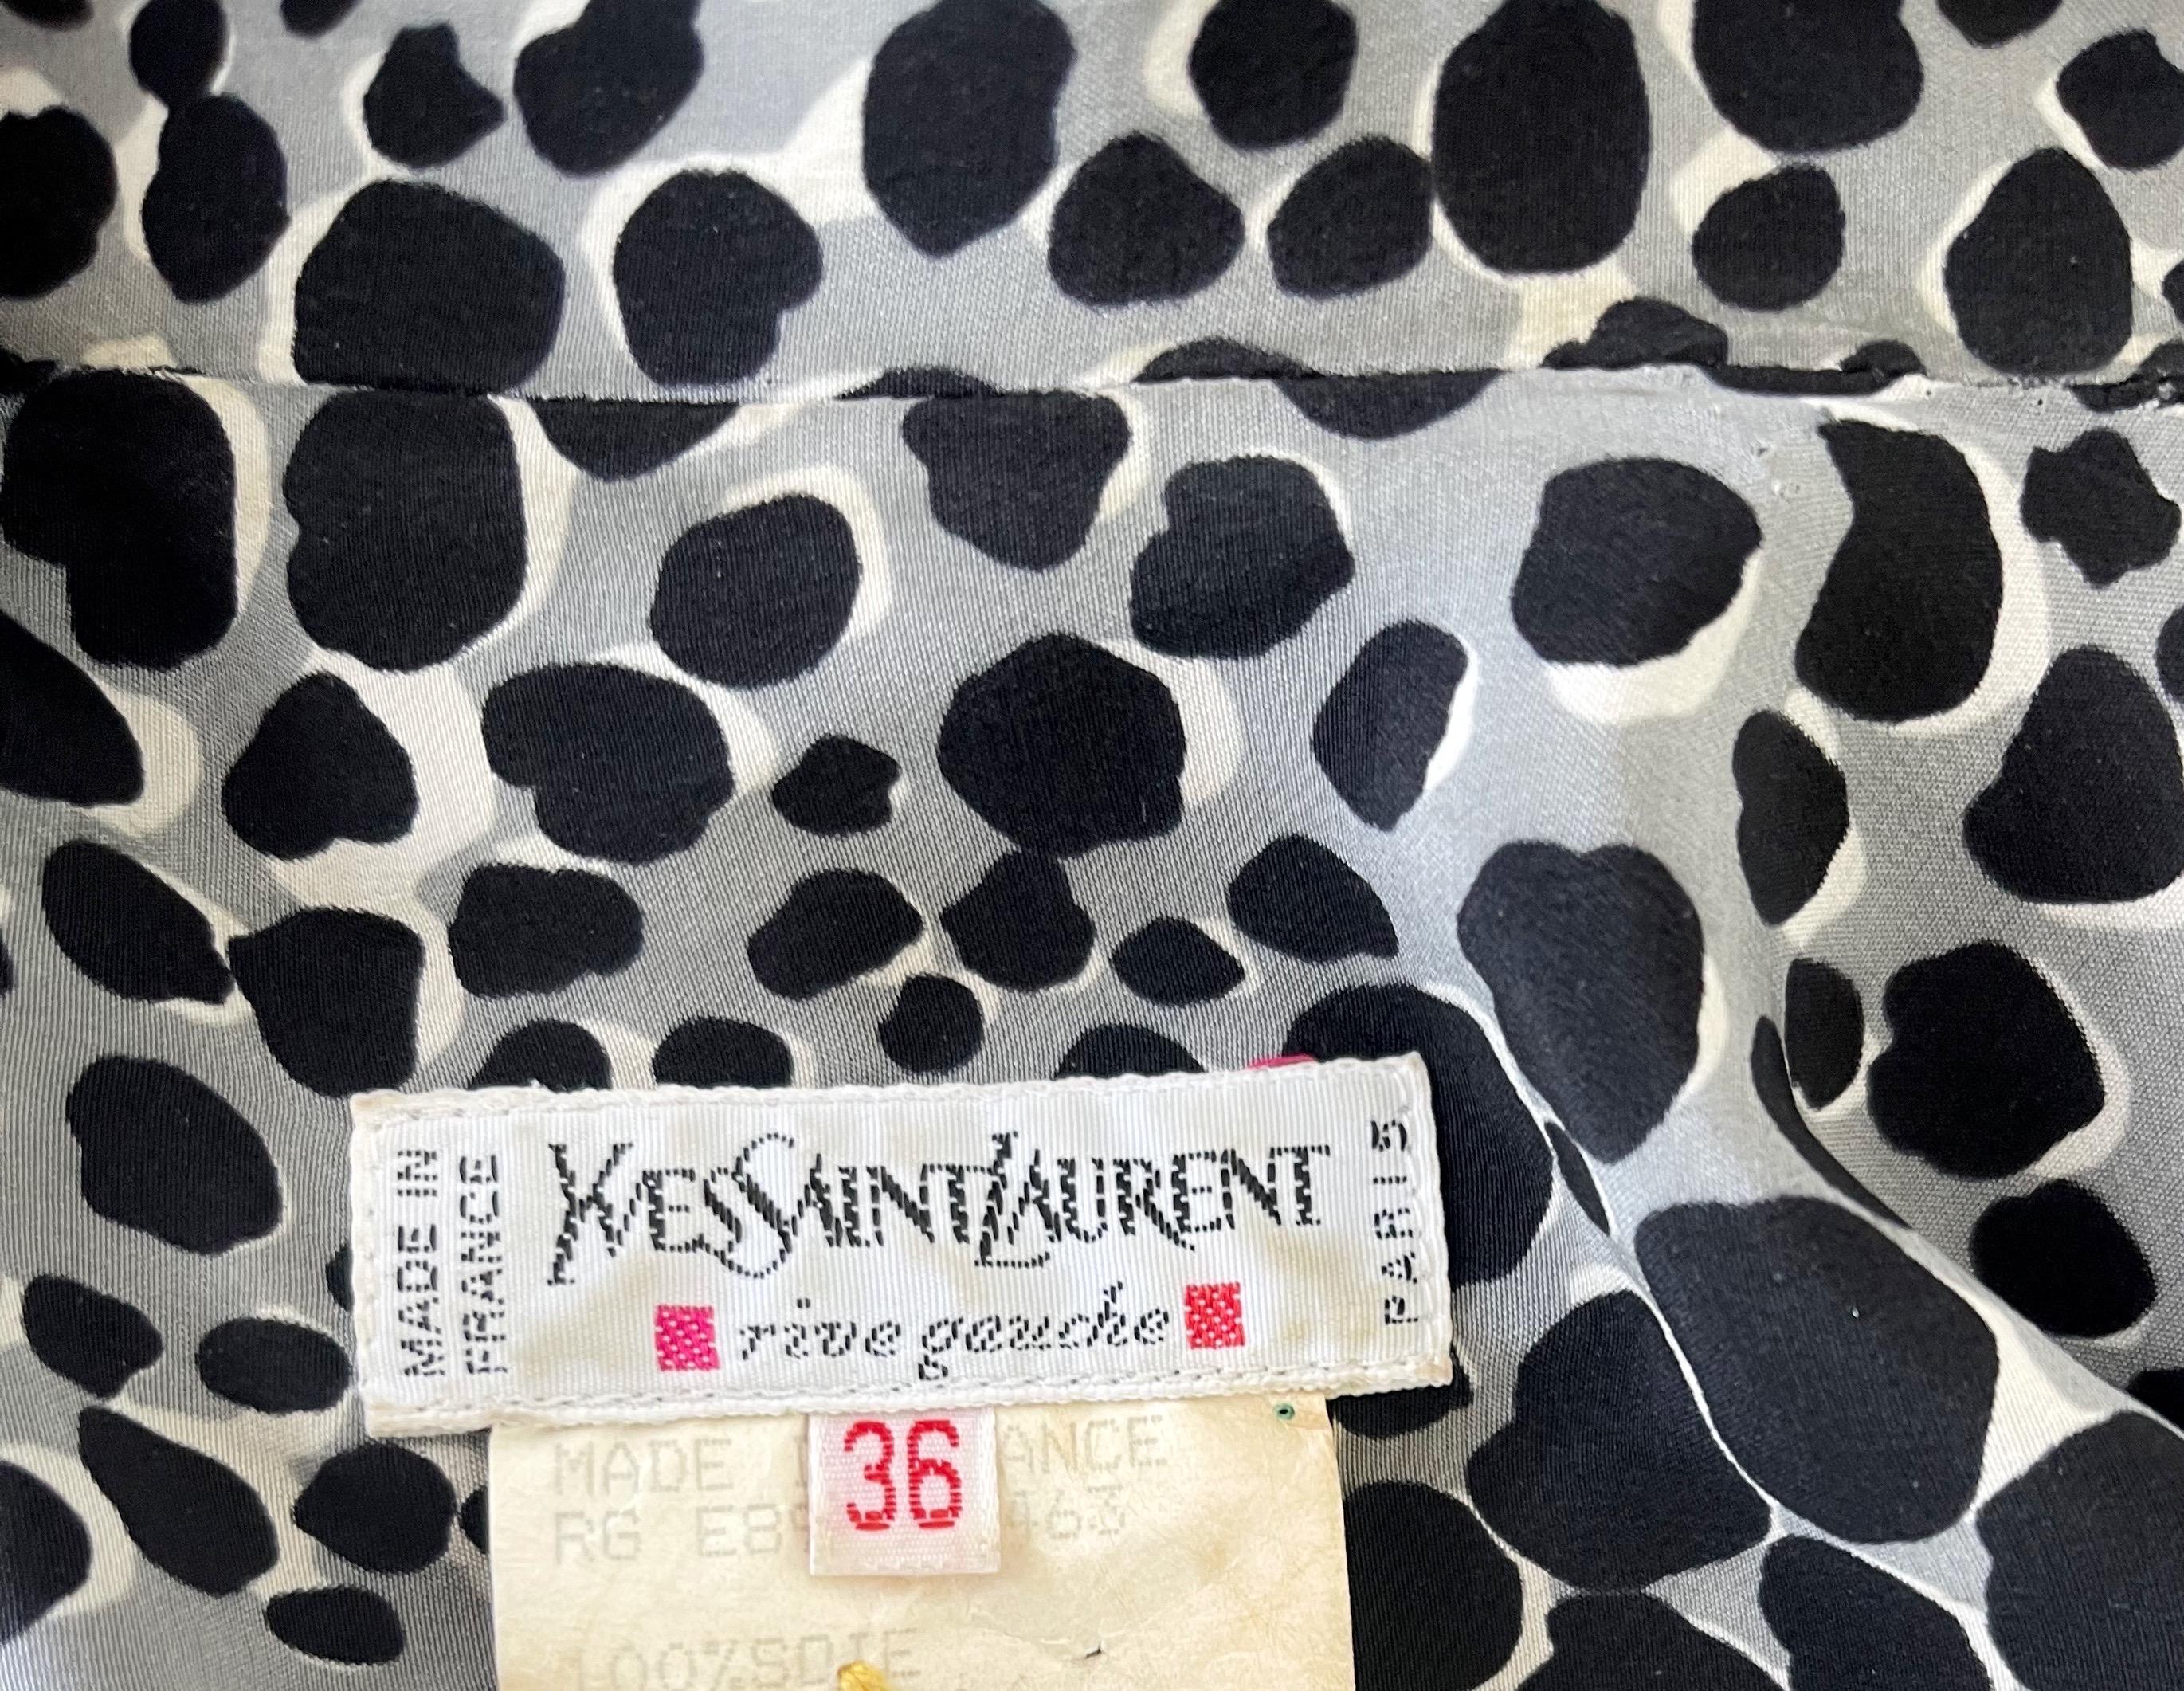 Chic vintage early 90s YVES SAINT LAURENT Rive Gache YSL leopard cheetah animal print black, grey and white silk dress ! Wrap style that buttons up the front. Pussycat bow ties at center front neck. Hidden zipper at each sleeve cuff. Great alone or